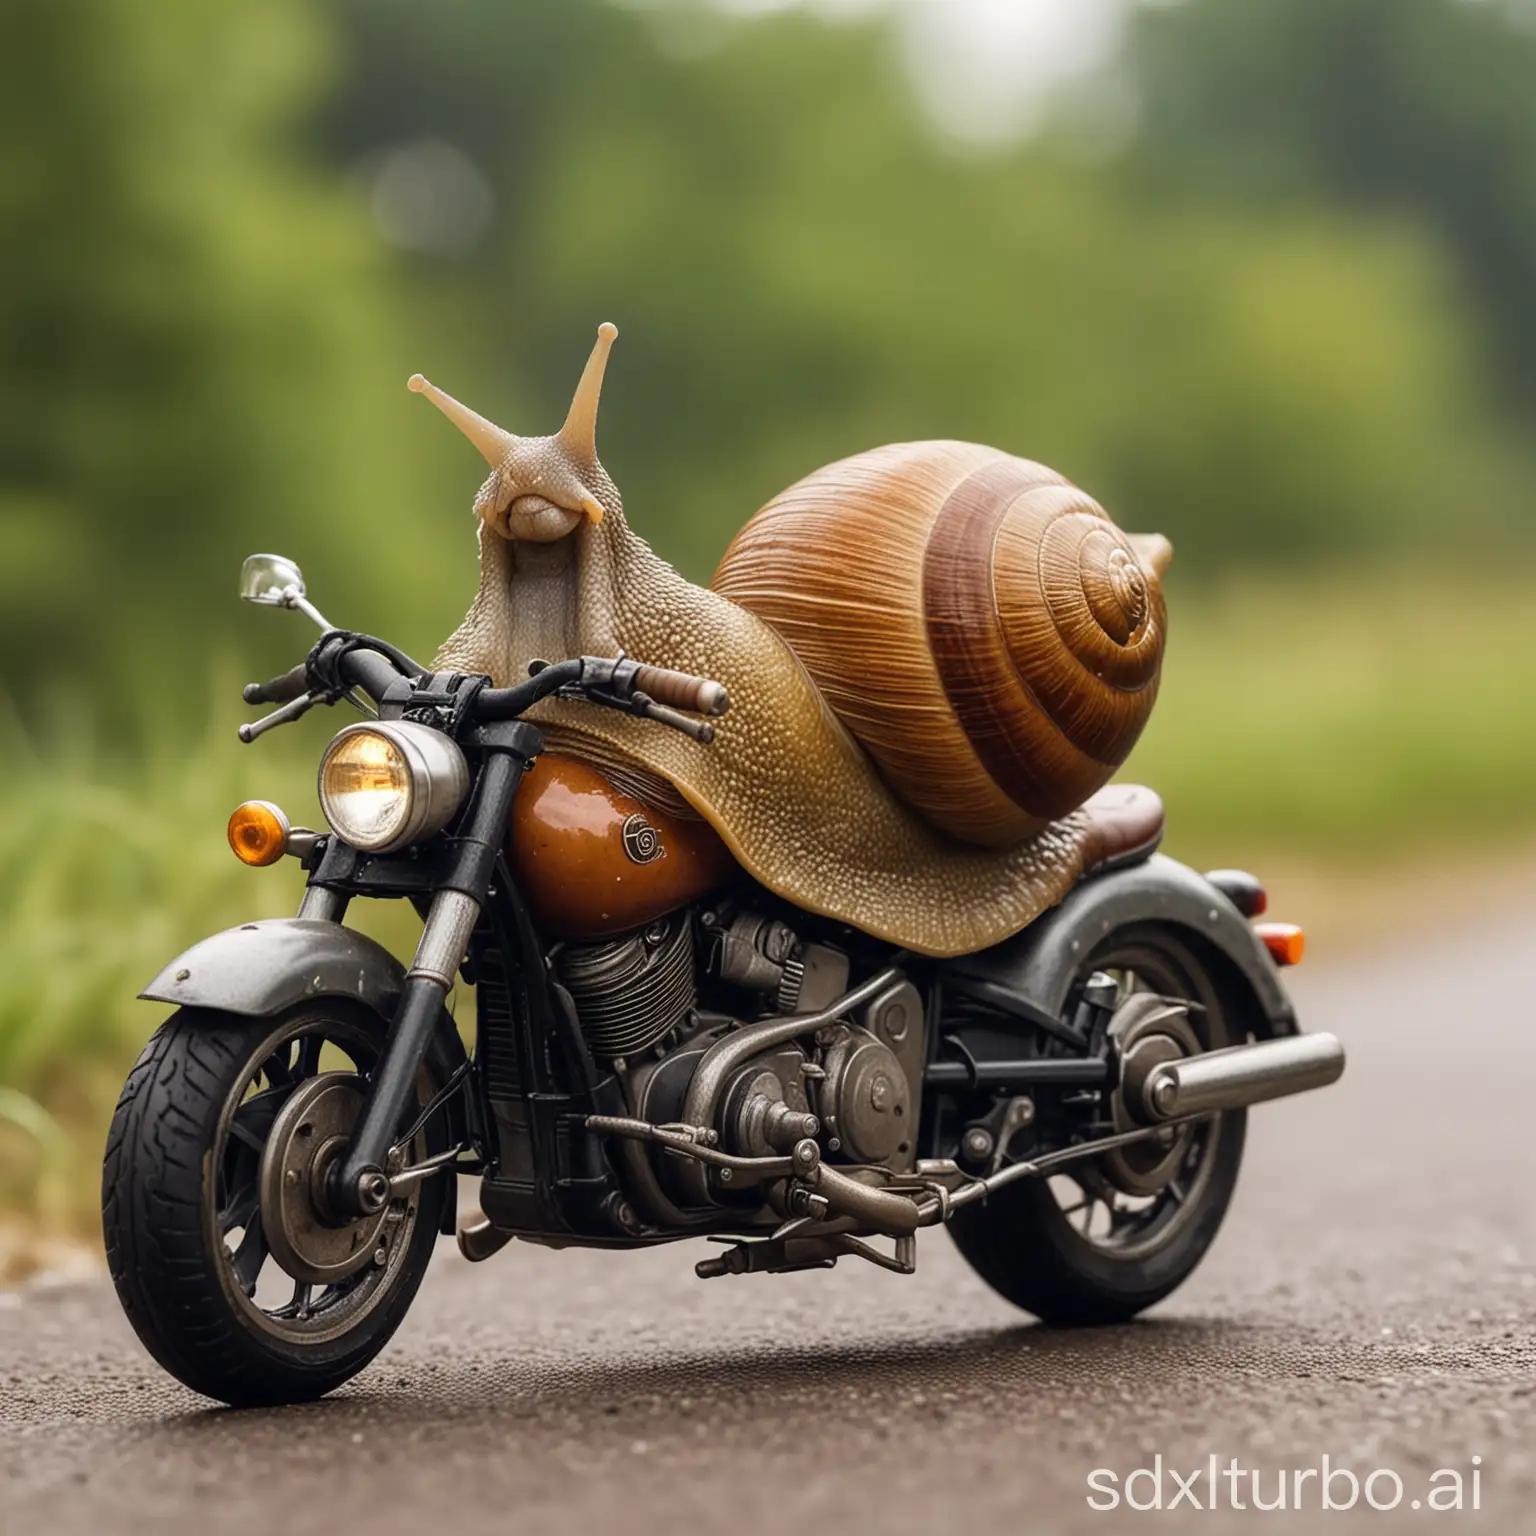 Adventurous-Snail-Riding-a-Motorcycle-in-a-Green-Meadow